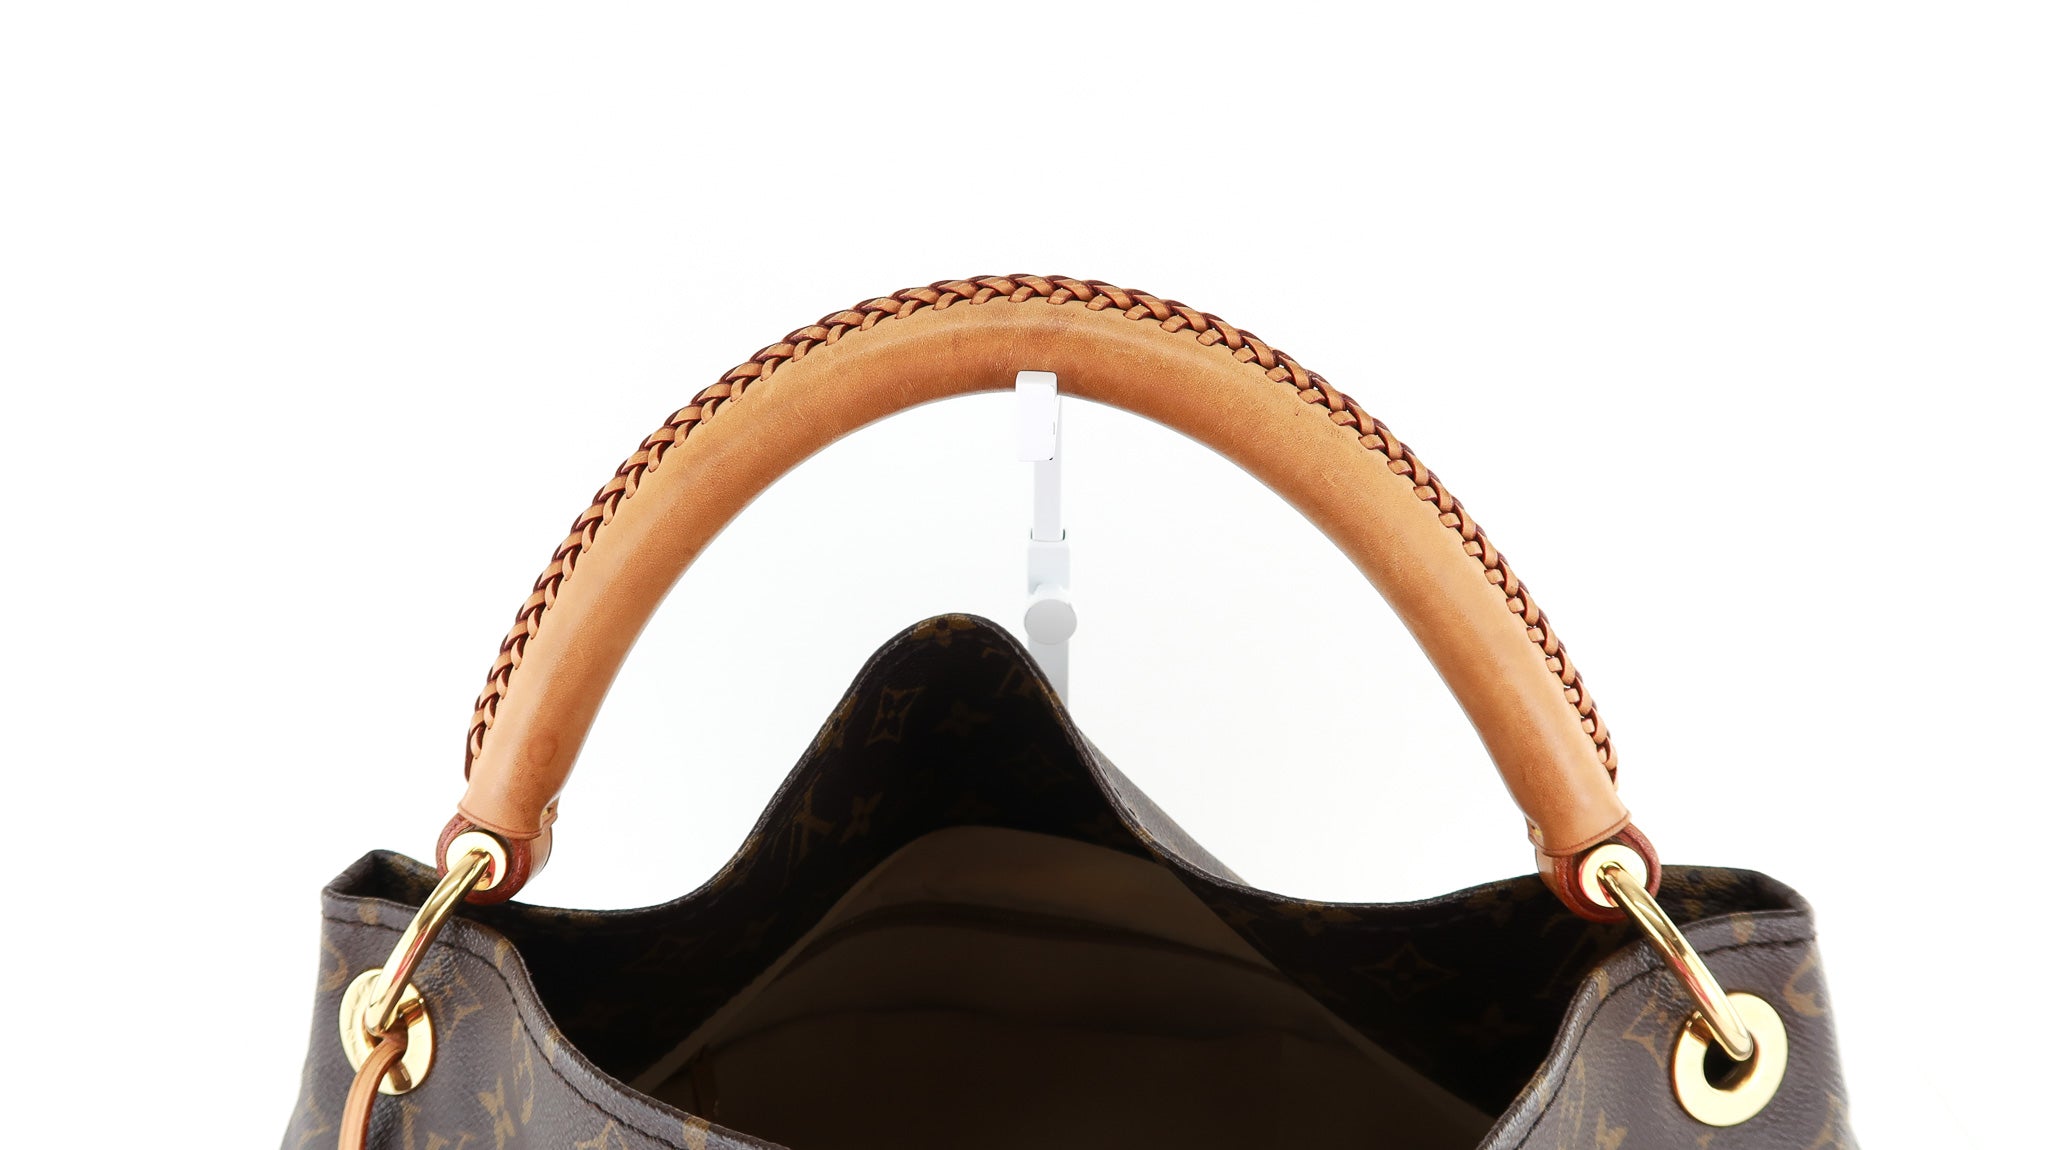 Louis Vuitton Monogram Artsy MM Hobo with Braided Handle Leather